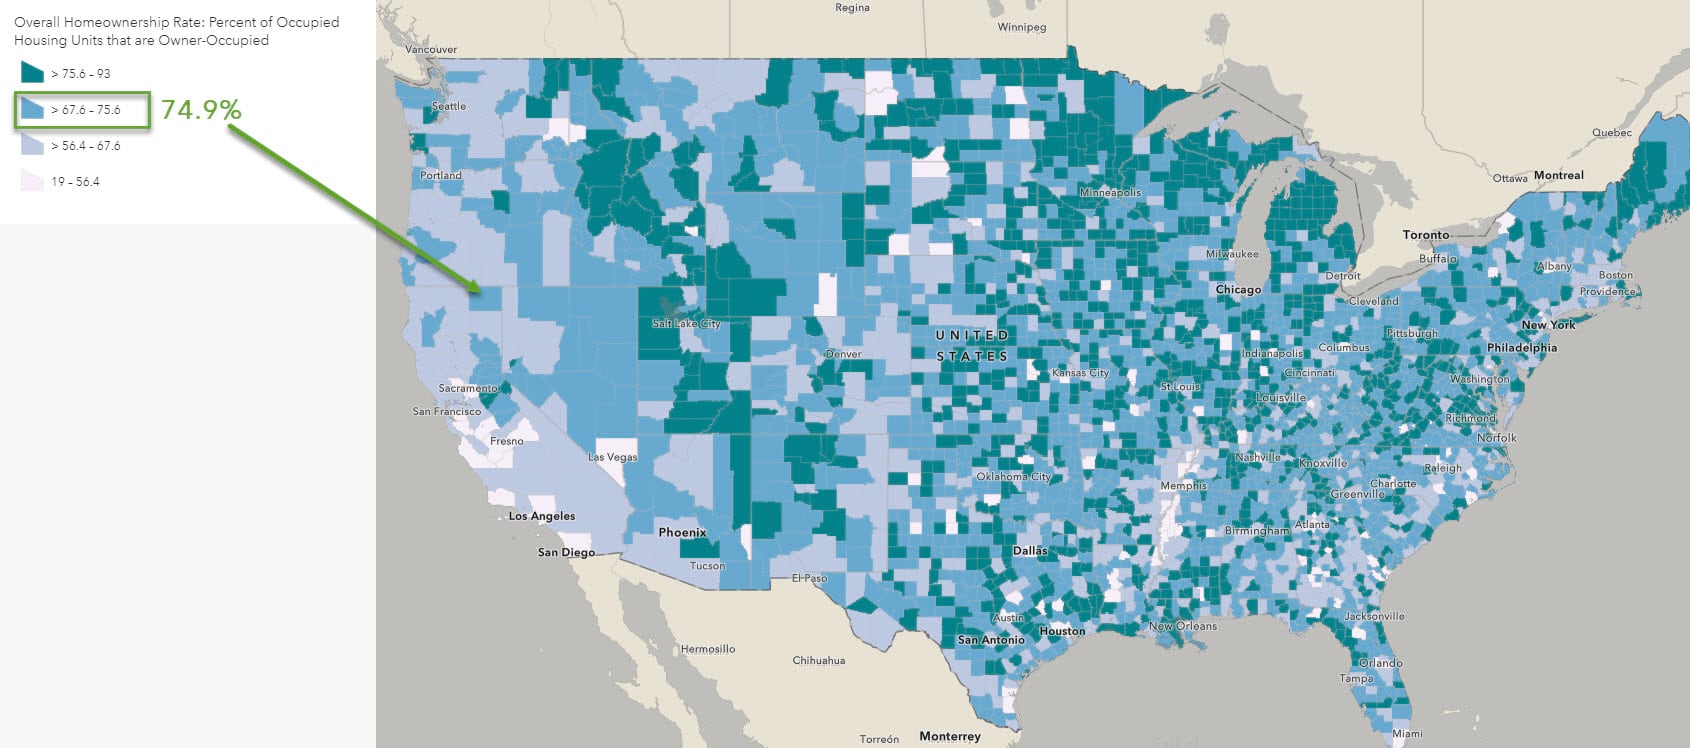 A classified map of homeownership rates with Modoc County in the 2nd-darkest blue. Each county is one of only four shades of blue.